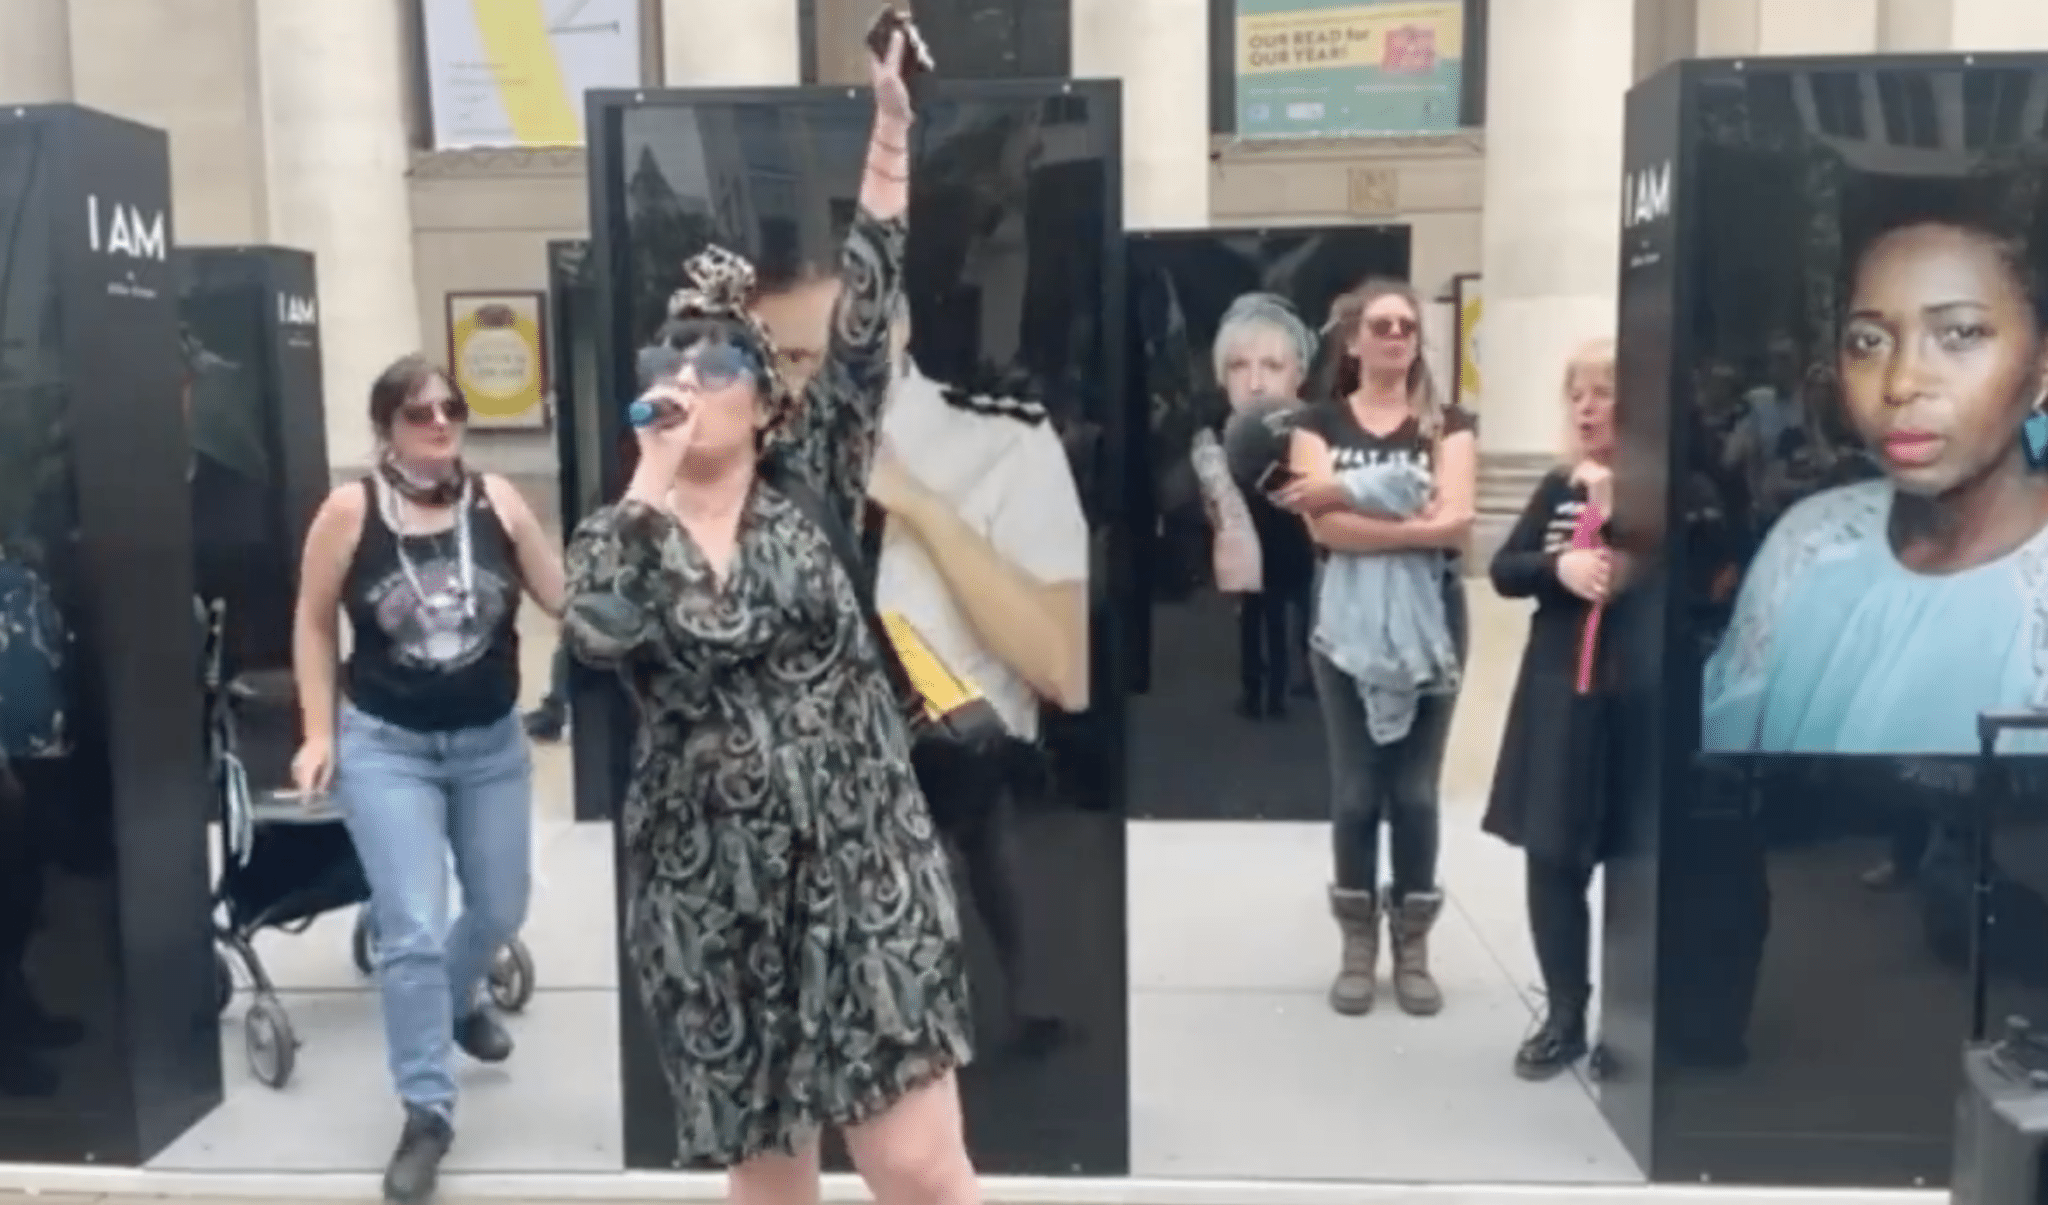 Cis woman interrupts feeble anti-trans protest and instantly becomes an icon